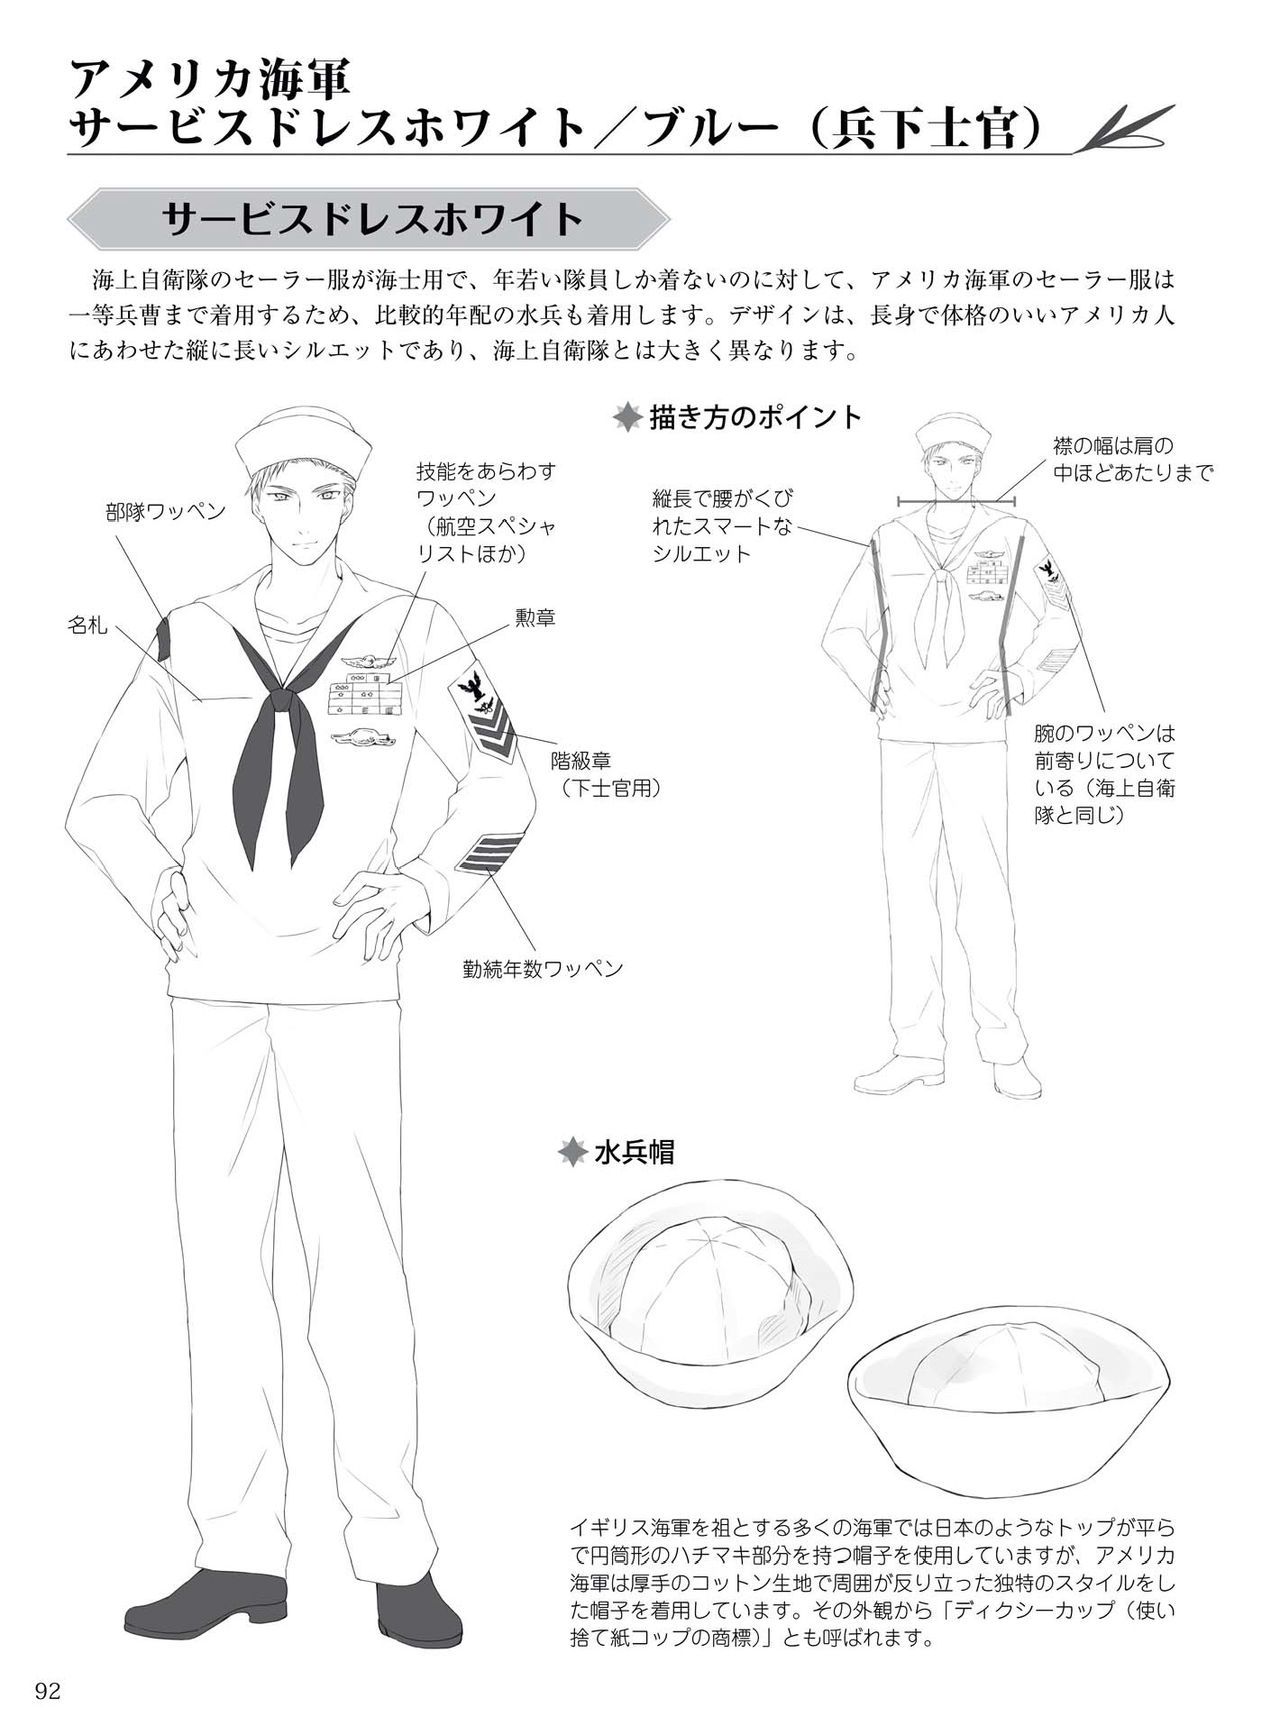 How to draw military uniforms and uniforms From Self-Defense Forces 軍服・制服の描き方 アメリカ軍・自衛隊の制服から戦闘服まで 95